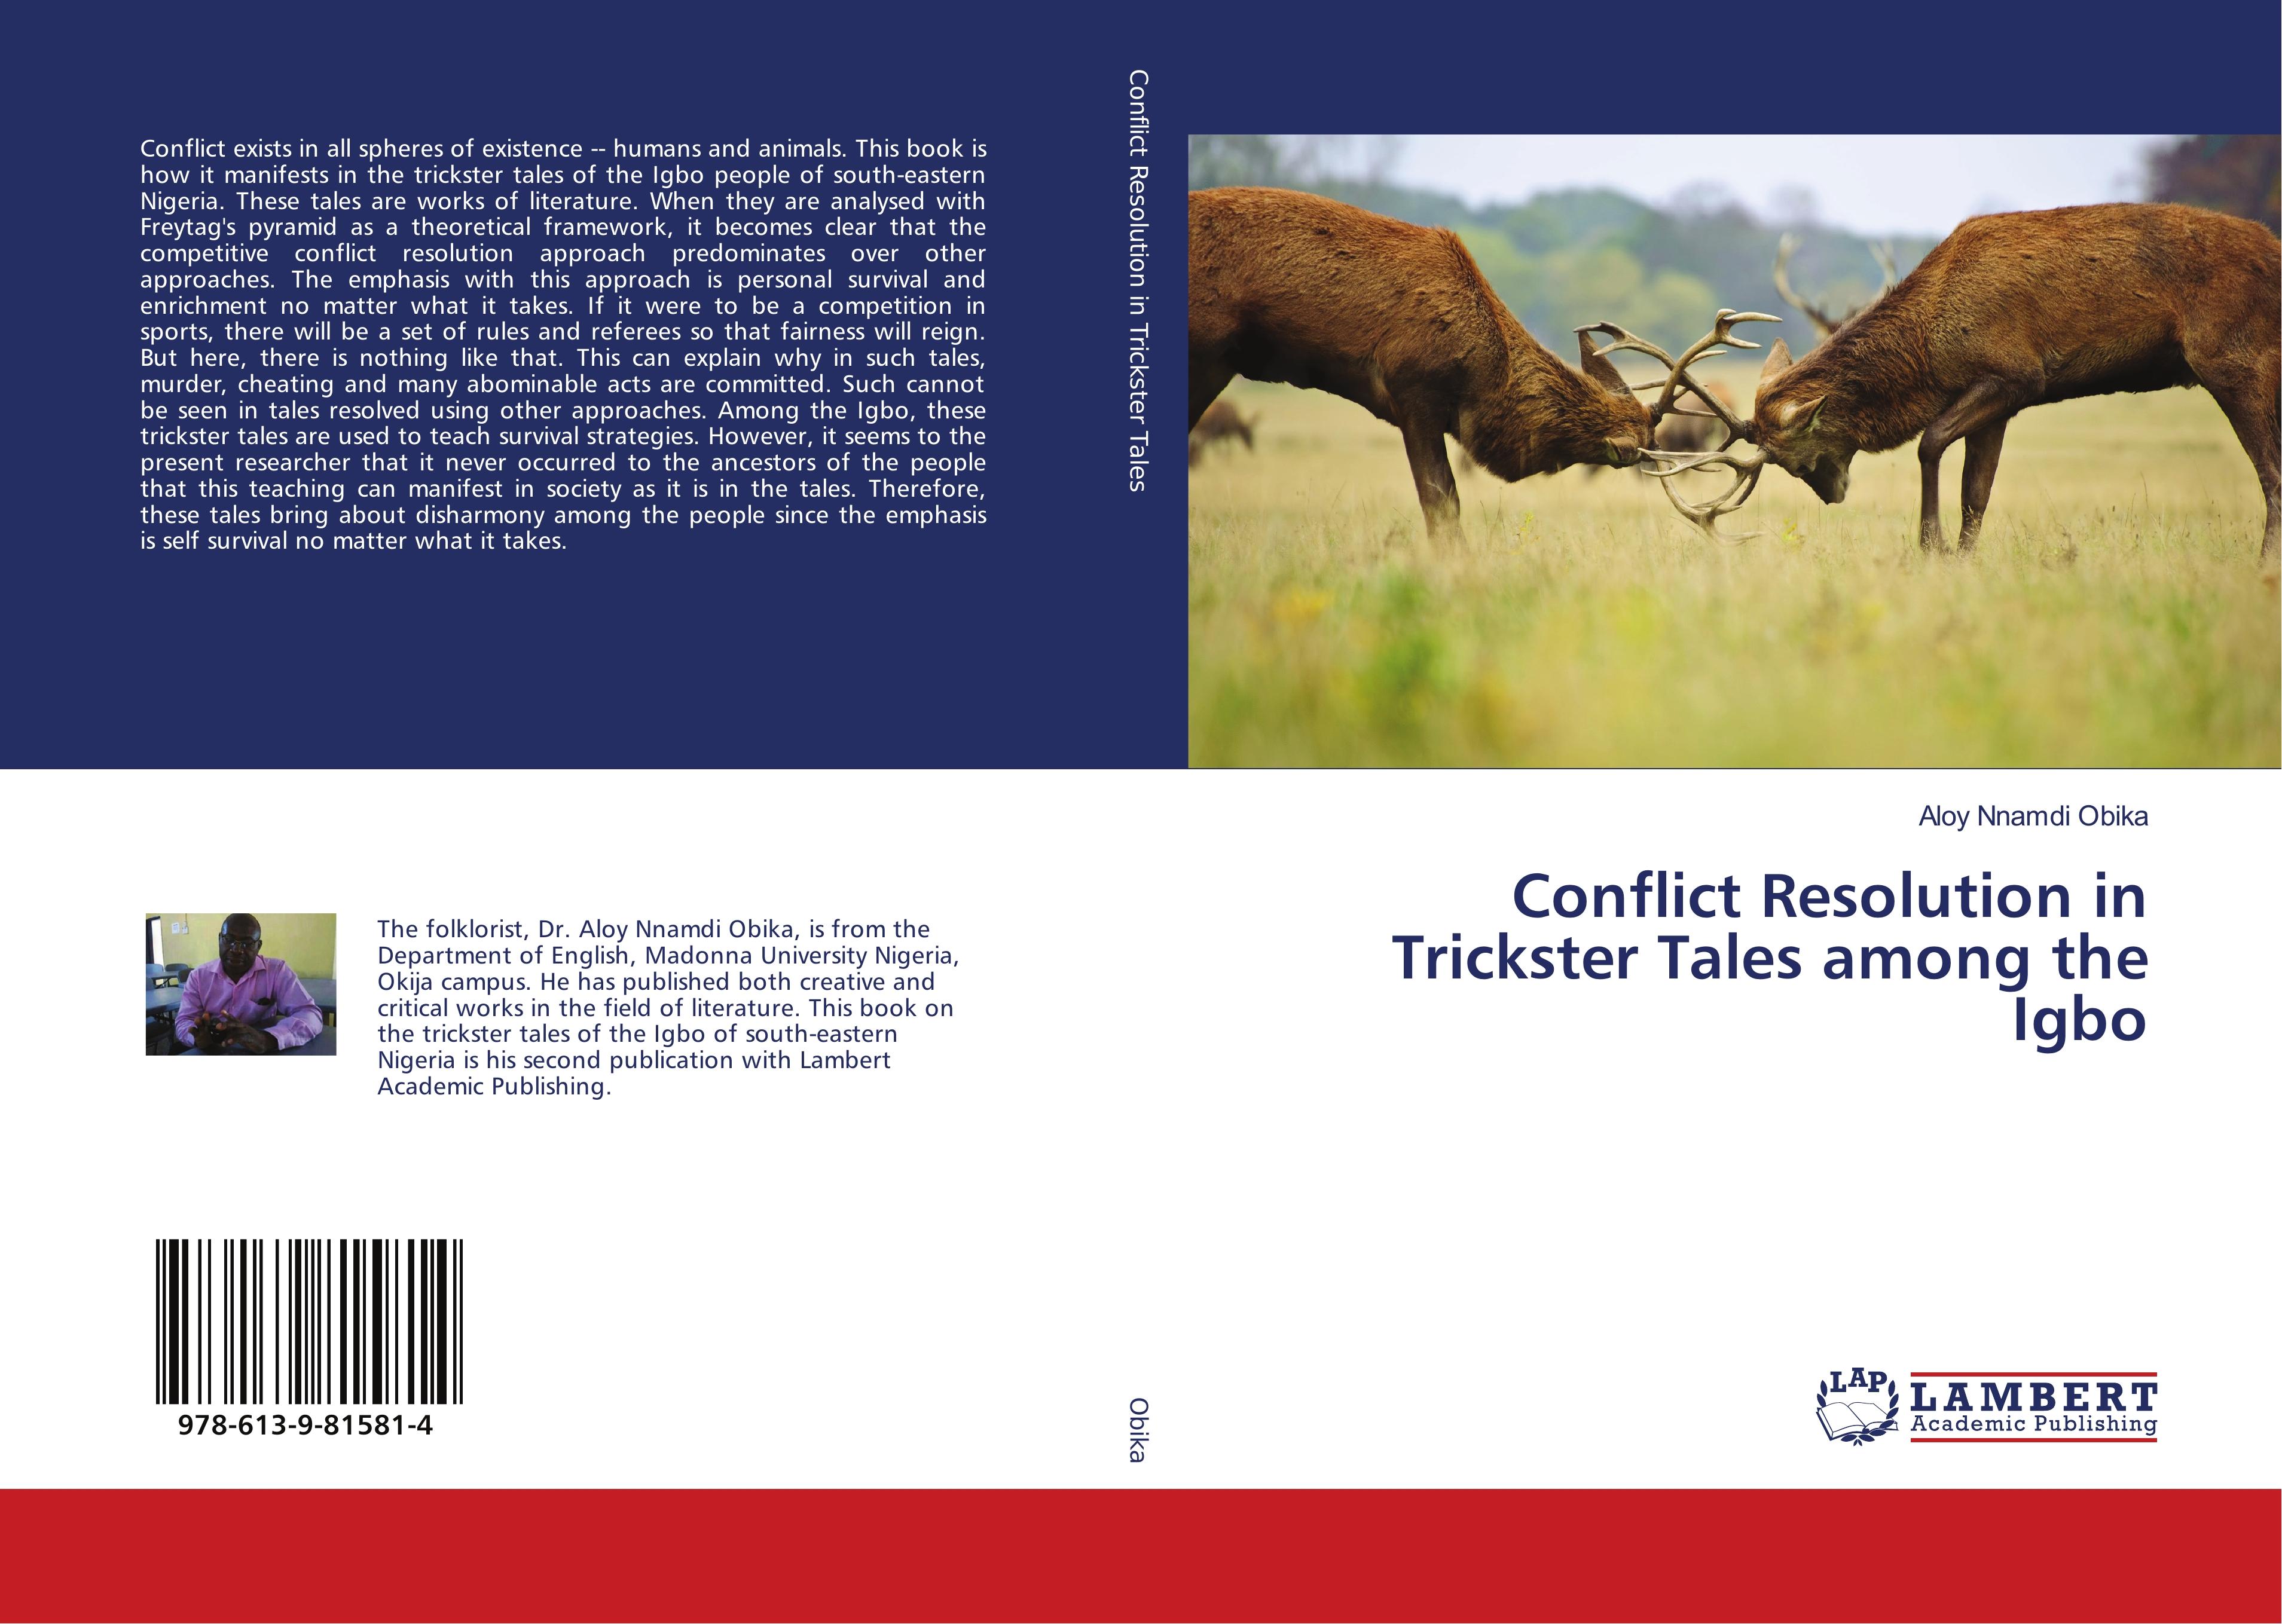 Conflict Resolution in Trickster Tales among the Igbo - Aloy Nnamdi Obika